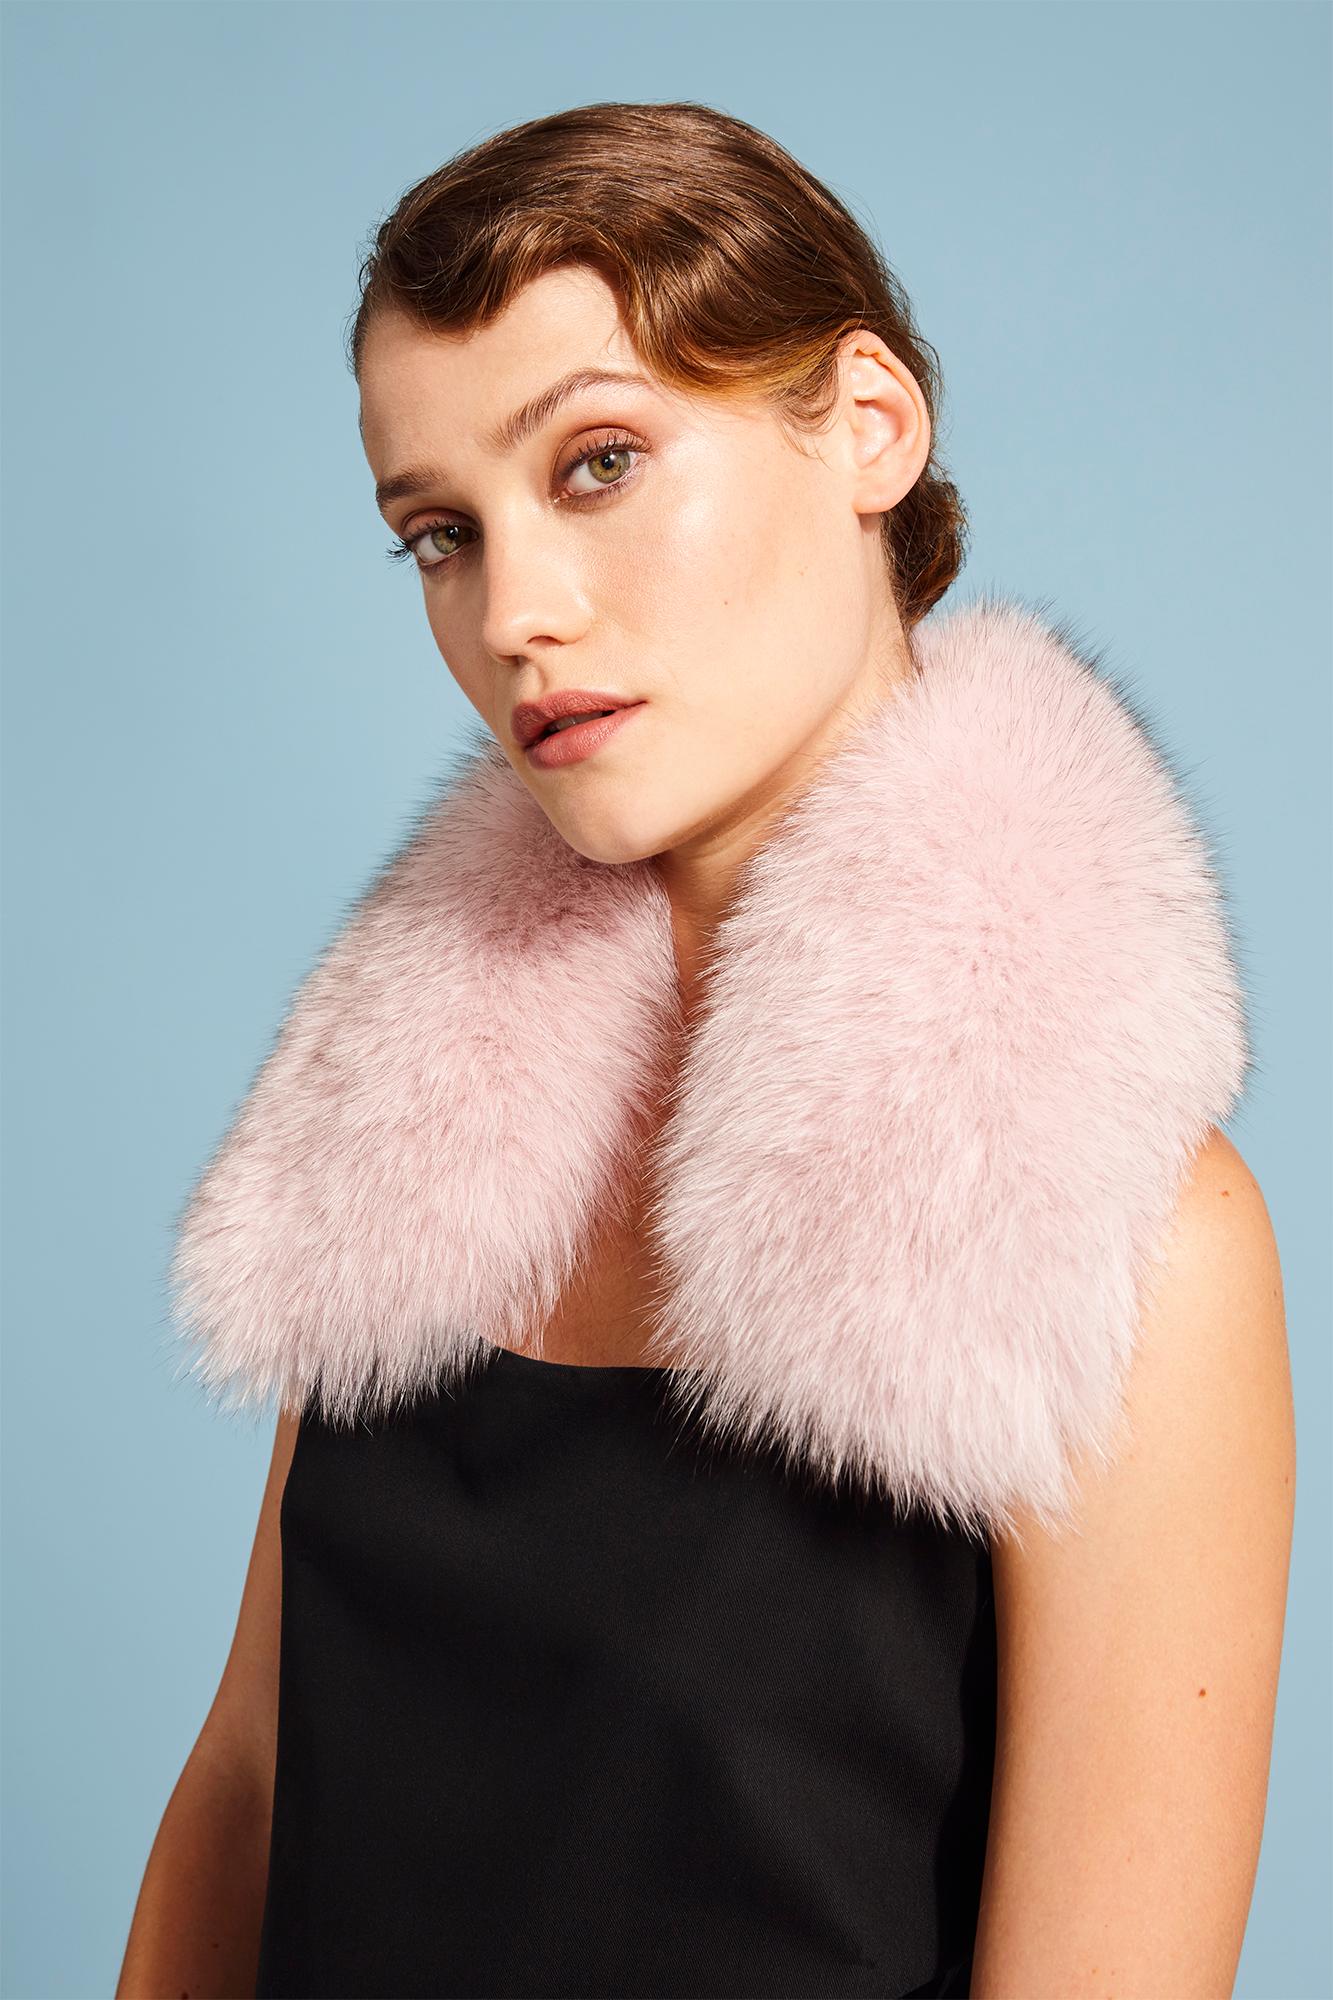 Verheyen London Peter Pan Collar in Pastel Rose Pink Fox Fur 
The Peter Pan collar is Verheyen London’s classic staple for effortless style for casual wear.

To throw over your favourite knit or leather jacket.

PRODUCT DETAILS

The Peter Pan collar